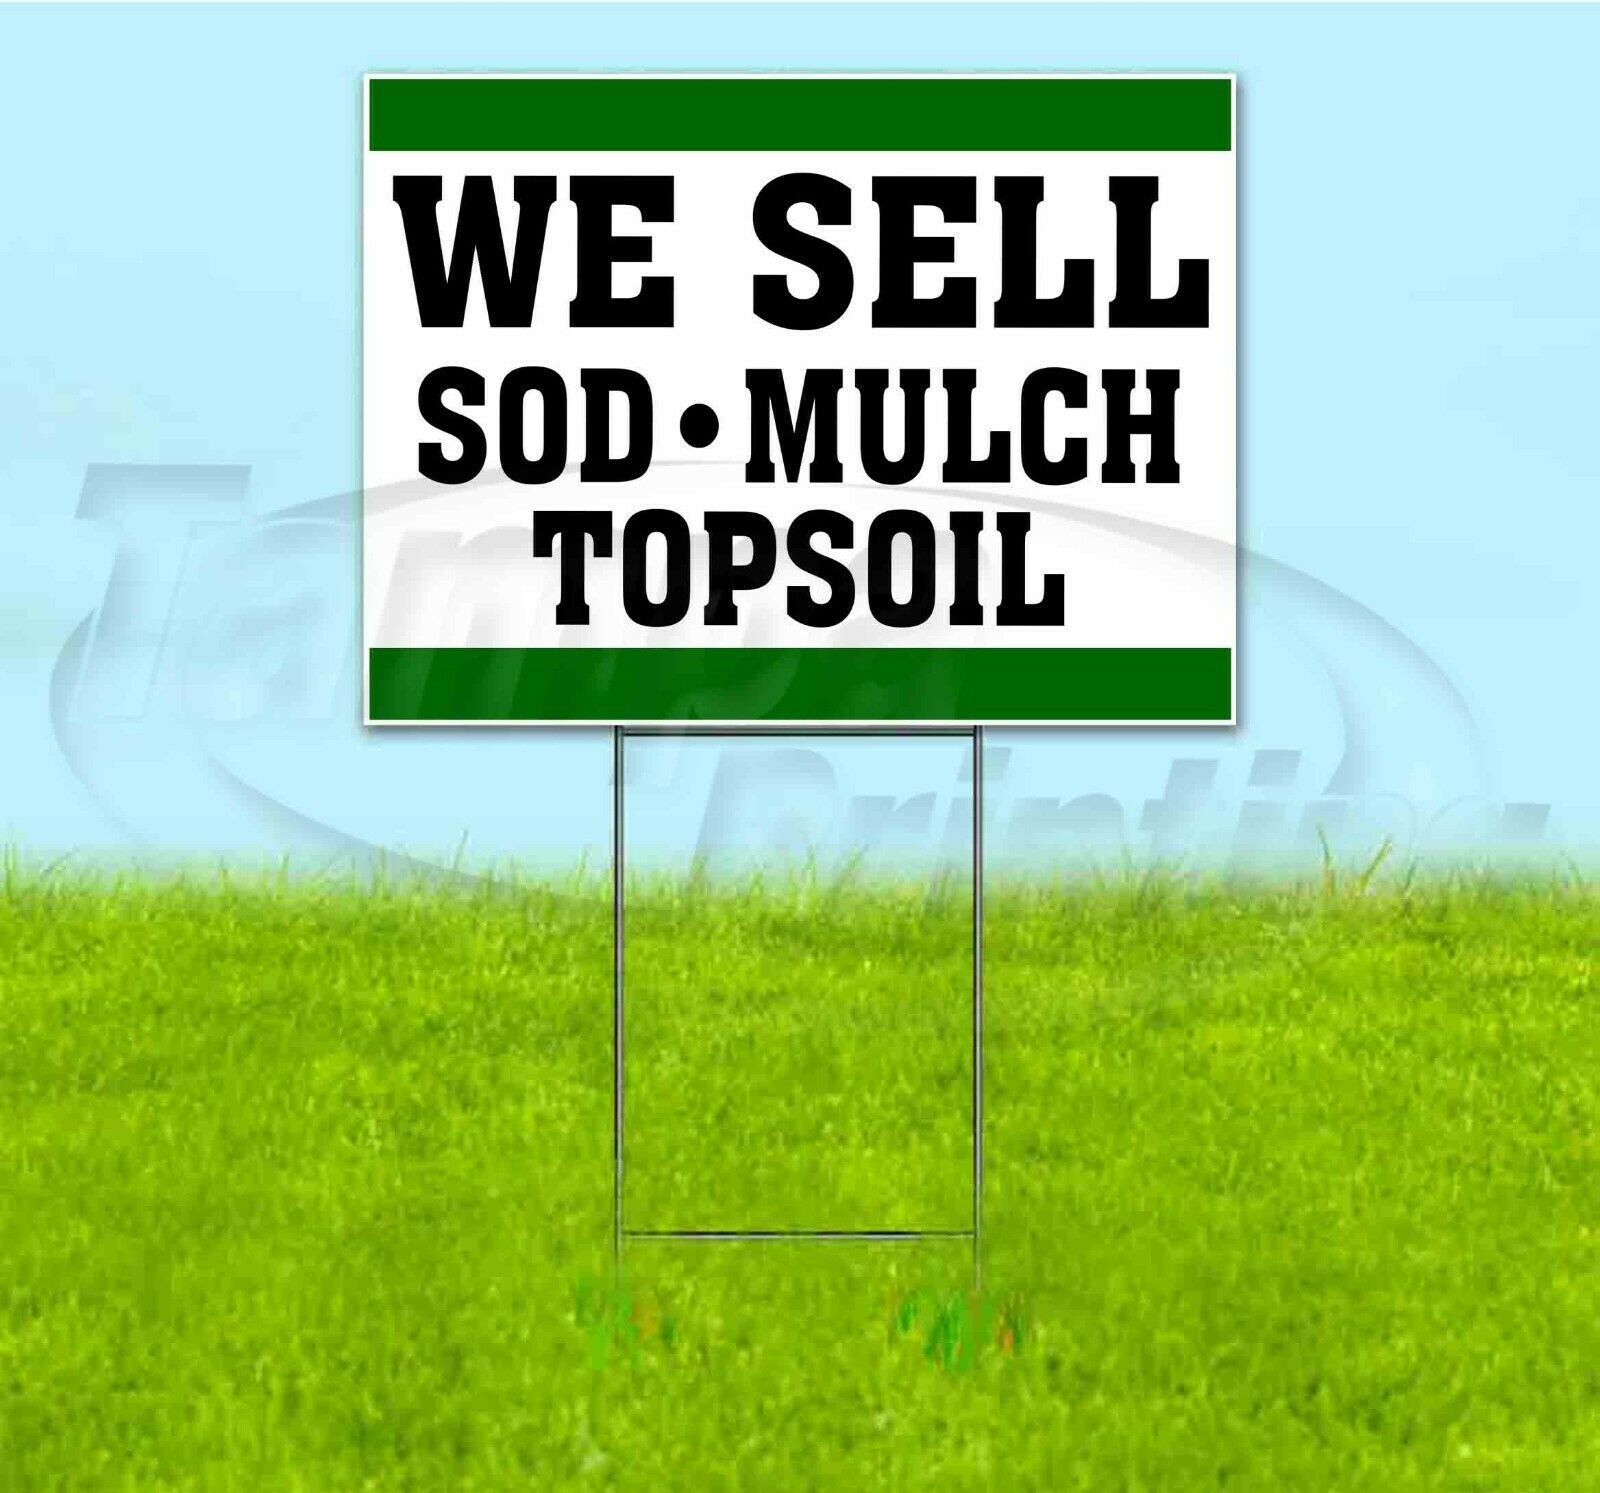 WE SELL SOD MULCH TOPSOIL 18x24 Yard Sign WITH STAKE Corrugated LANDSCAPING